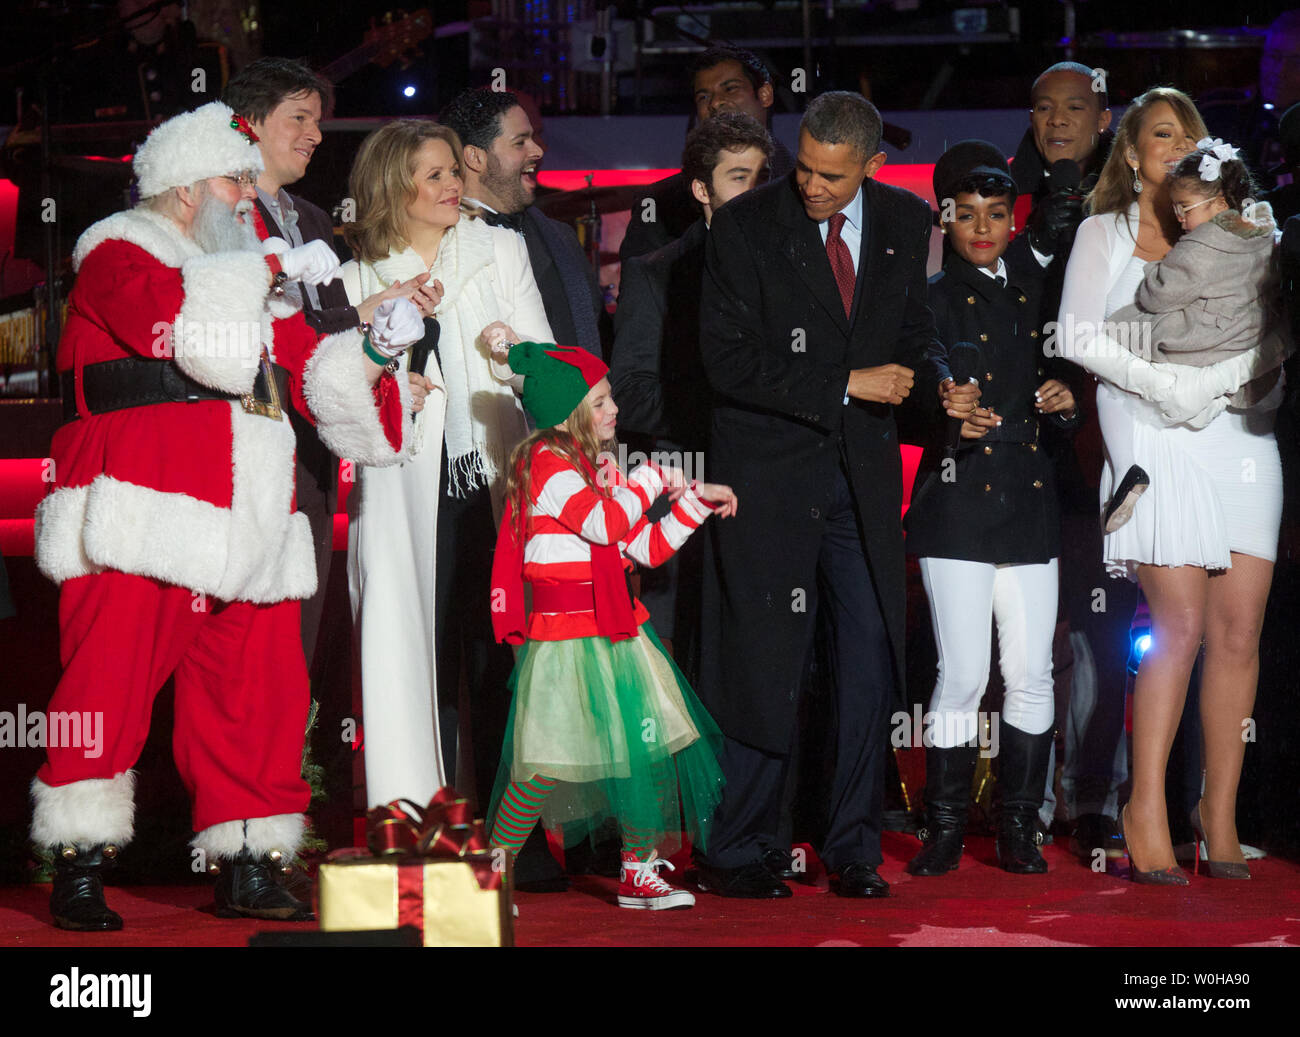 President Barack Obama dances with an elf entertainer next to Janelle Monae (2nd Right),  Mariah Carey (Right), Renee Fleming (3rd Left) and other guests after taking part in the 2013 National Christmas Tree Lighting on the Ellipse in Washington, D.C. December 6, 2013.   UPI/Molly Riley Stock Photo